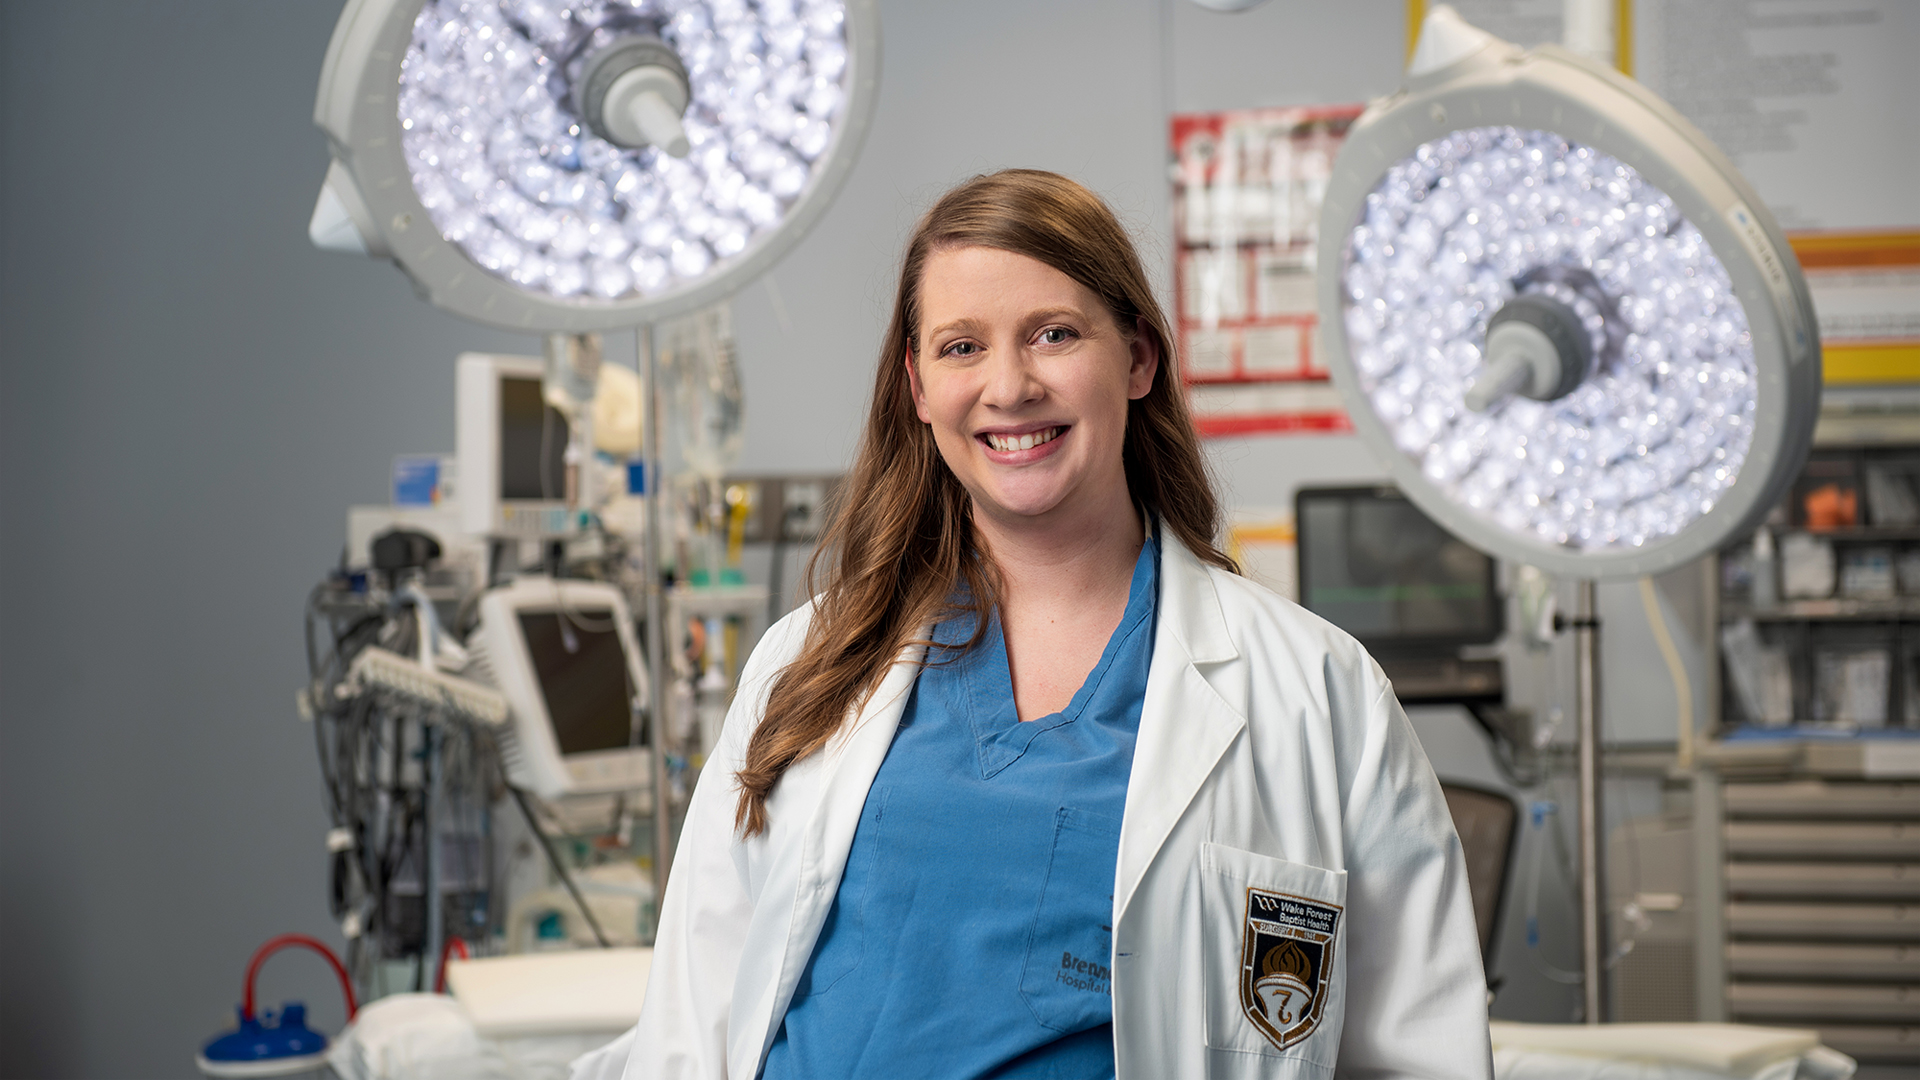 Dr. Jessica Rauh, general surgery resident at Wake Forest University School of Medicine, who has been selected to study pediatric minimally invasive surgery at IRCAD, a France-based, global research and training institute.